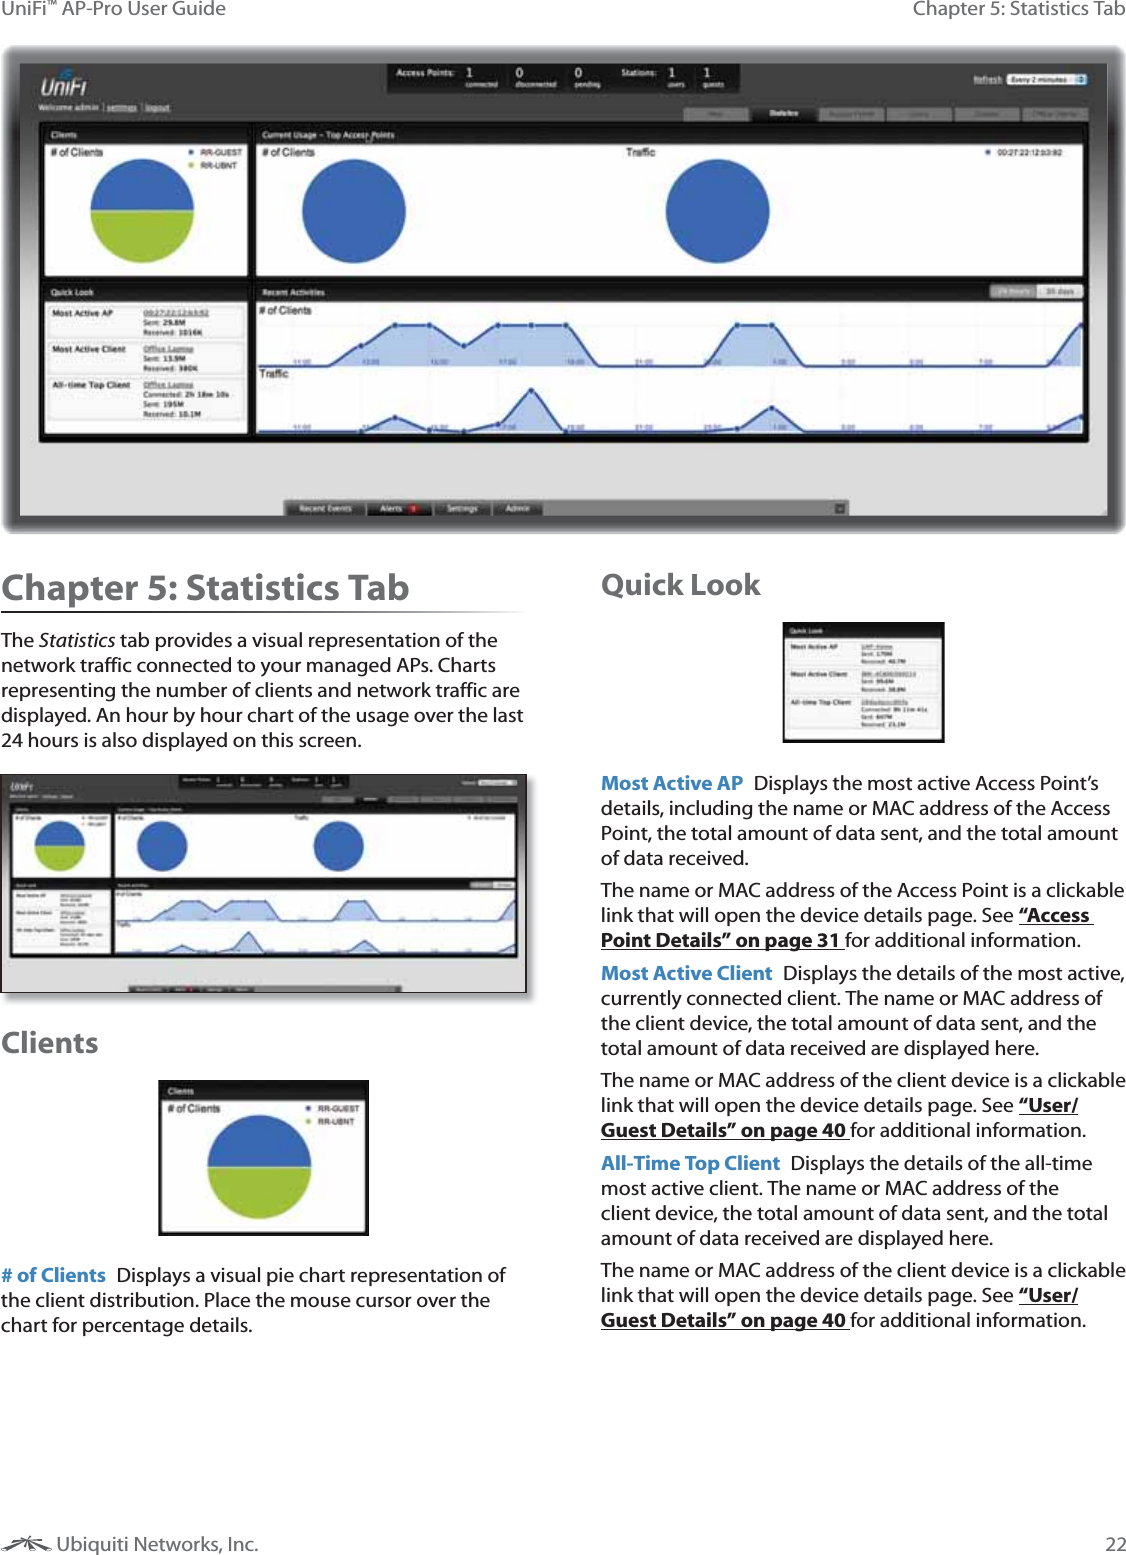 22Chapter 5: Statistics TabUniFi™ AP-Pro User Guide Ubiquiti Networks, Inc.Chapter 5: Statistics TabThe Statistics tab provides a visual representation of the network traffic connected to your managed APs. Charts representing the number of clients and network traffic are displayed. An hour by hour chart of the usage over the last 24 hours is also displayed on this screen.Clients# of Clients  Displays a visual pie chart representation of the client distribution. Place the mouse cursor over the chart for percentage details.Quick LookMost Active AP  Displays the most active Access Point’s details, including the name or MAC address of the Access Point, the total amount of data sent, and the total amount of data received. The name or MAC address of the Access Point is a clickable link that will open the device details page. See “Access Point Details” on page 31 for additional information.Most Active Client  Displays the details of the most active, currently connected client. The name or MAC address of the client device, the total amount of data sent, and the total amount of data received are displayed here. The name or MAC address of the client device is a clickable link that will open the device details page. See “User/Guest Details” on page 40 for additional information.All-Time Top Client  Displays the details of the all-time most active client. The name or MAC address of the client device, the total amount of data sent, and the total amount of data received are displayed here. The name or MAC address of the client device is a clickable link that will open the device details page. See “User/Guest Details” on page 40 for additional information.